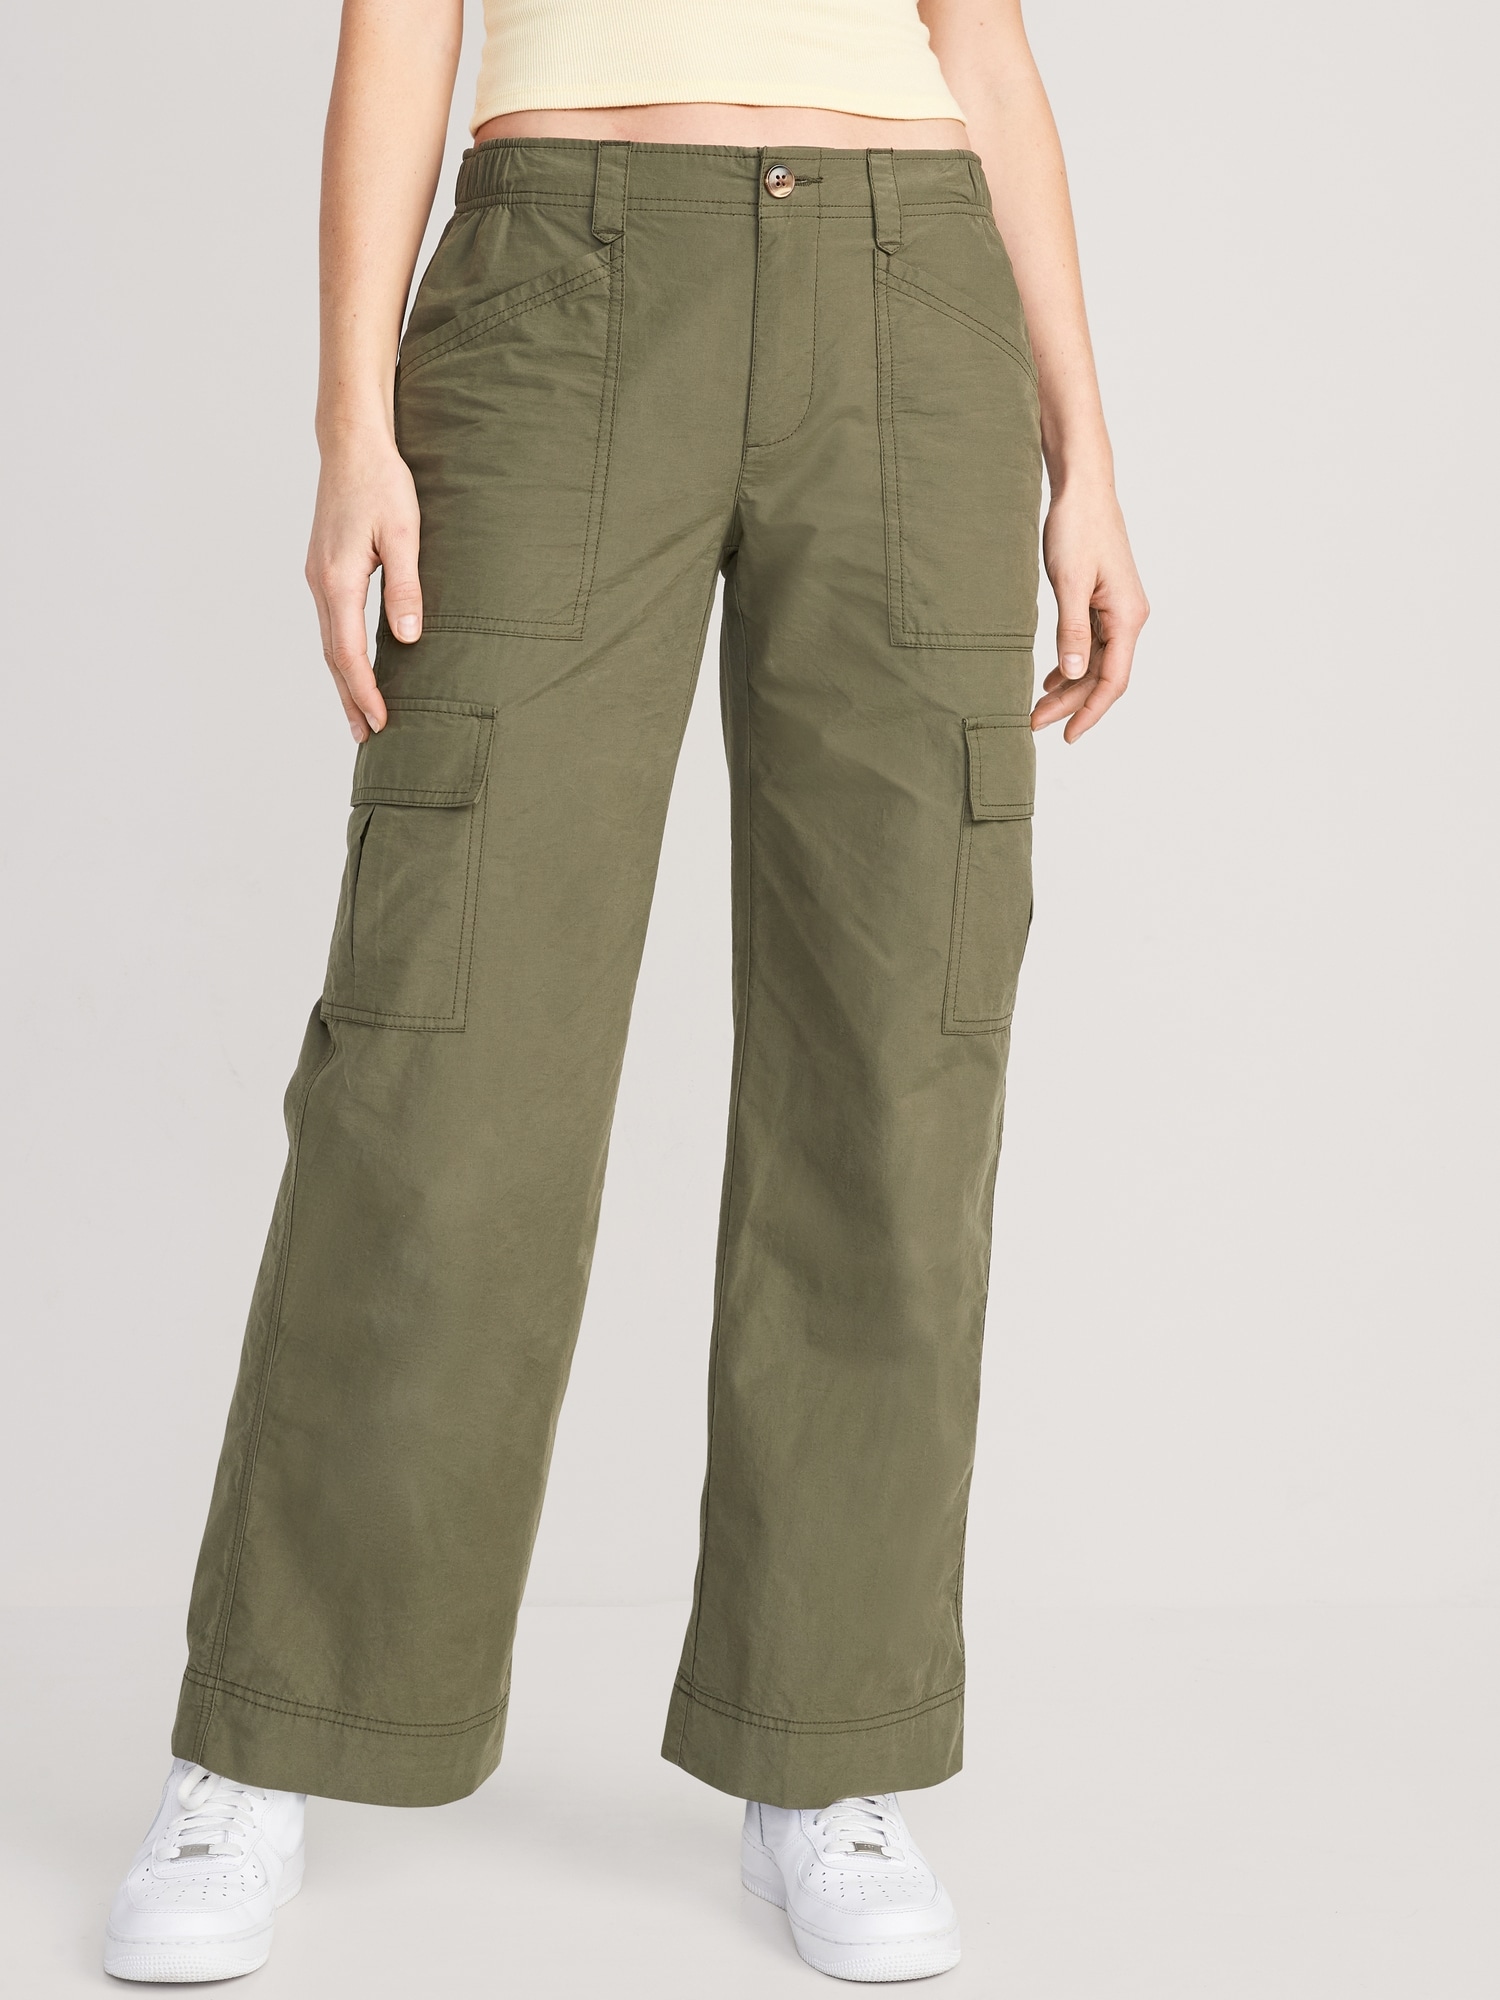 Adjustable Straight Fit Cargo Pants,Women's Casual Loose High